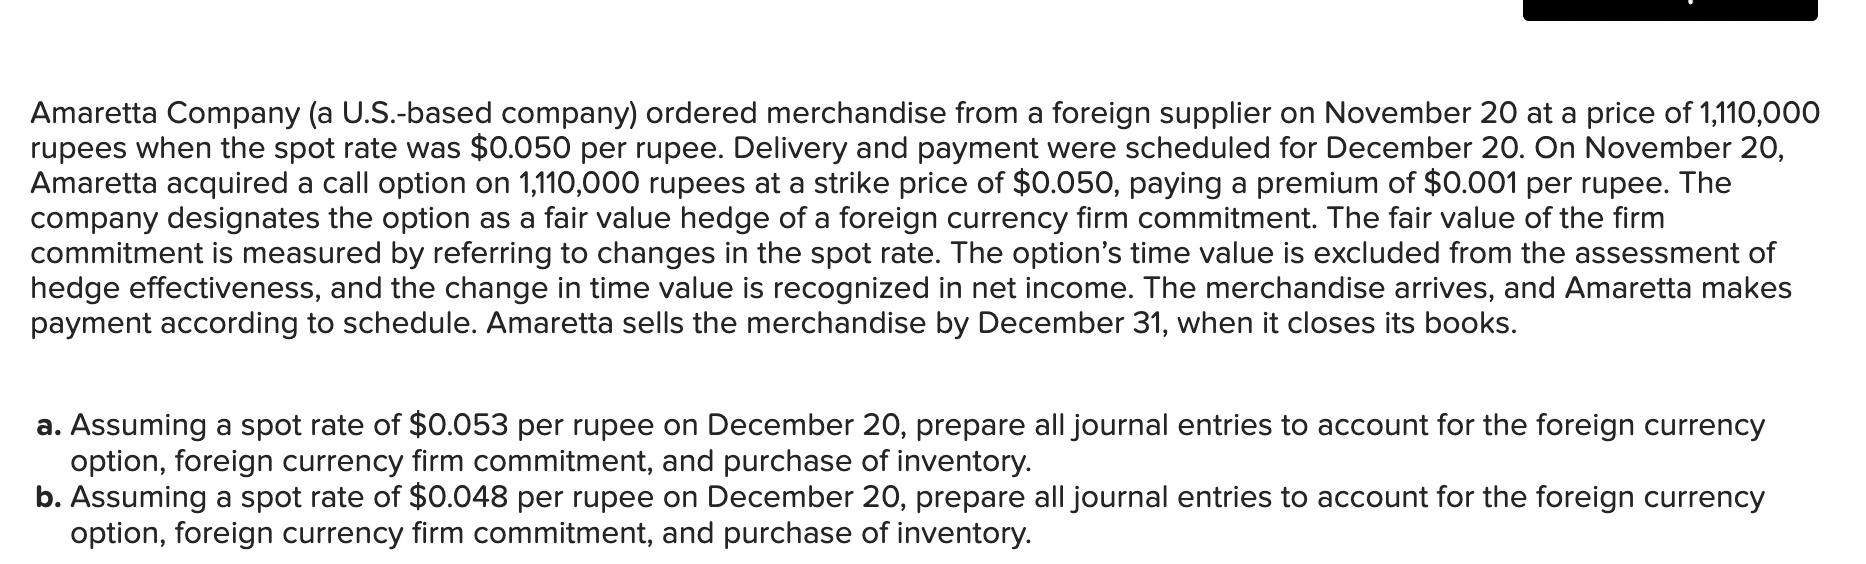 Amaretta Company (a U.S.-based company) ordered merchandise from a foreign supplier on November 20 at a price of ( 1,110,000